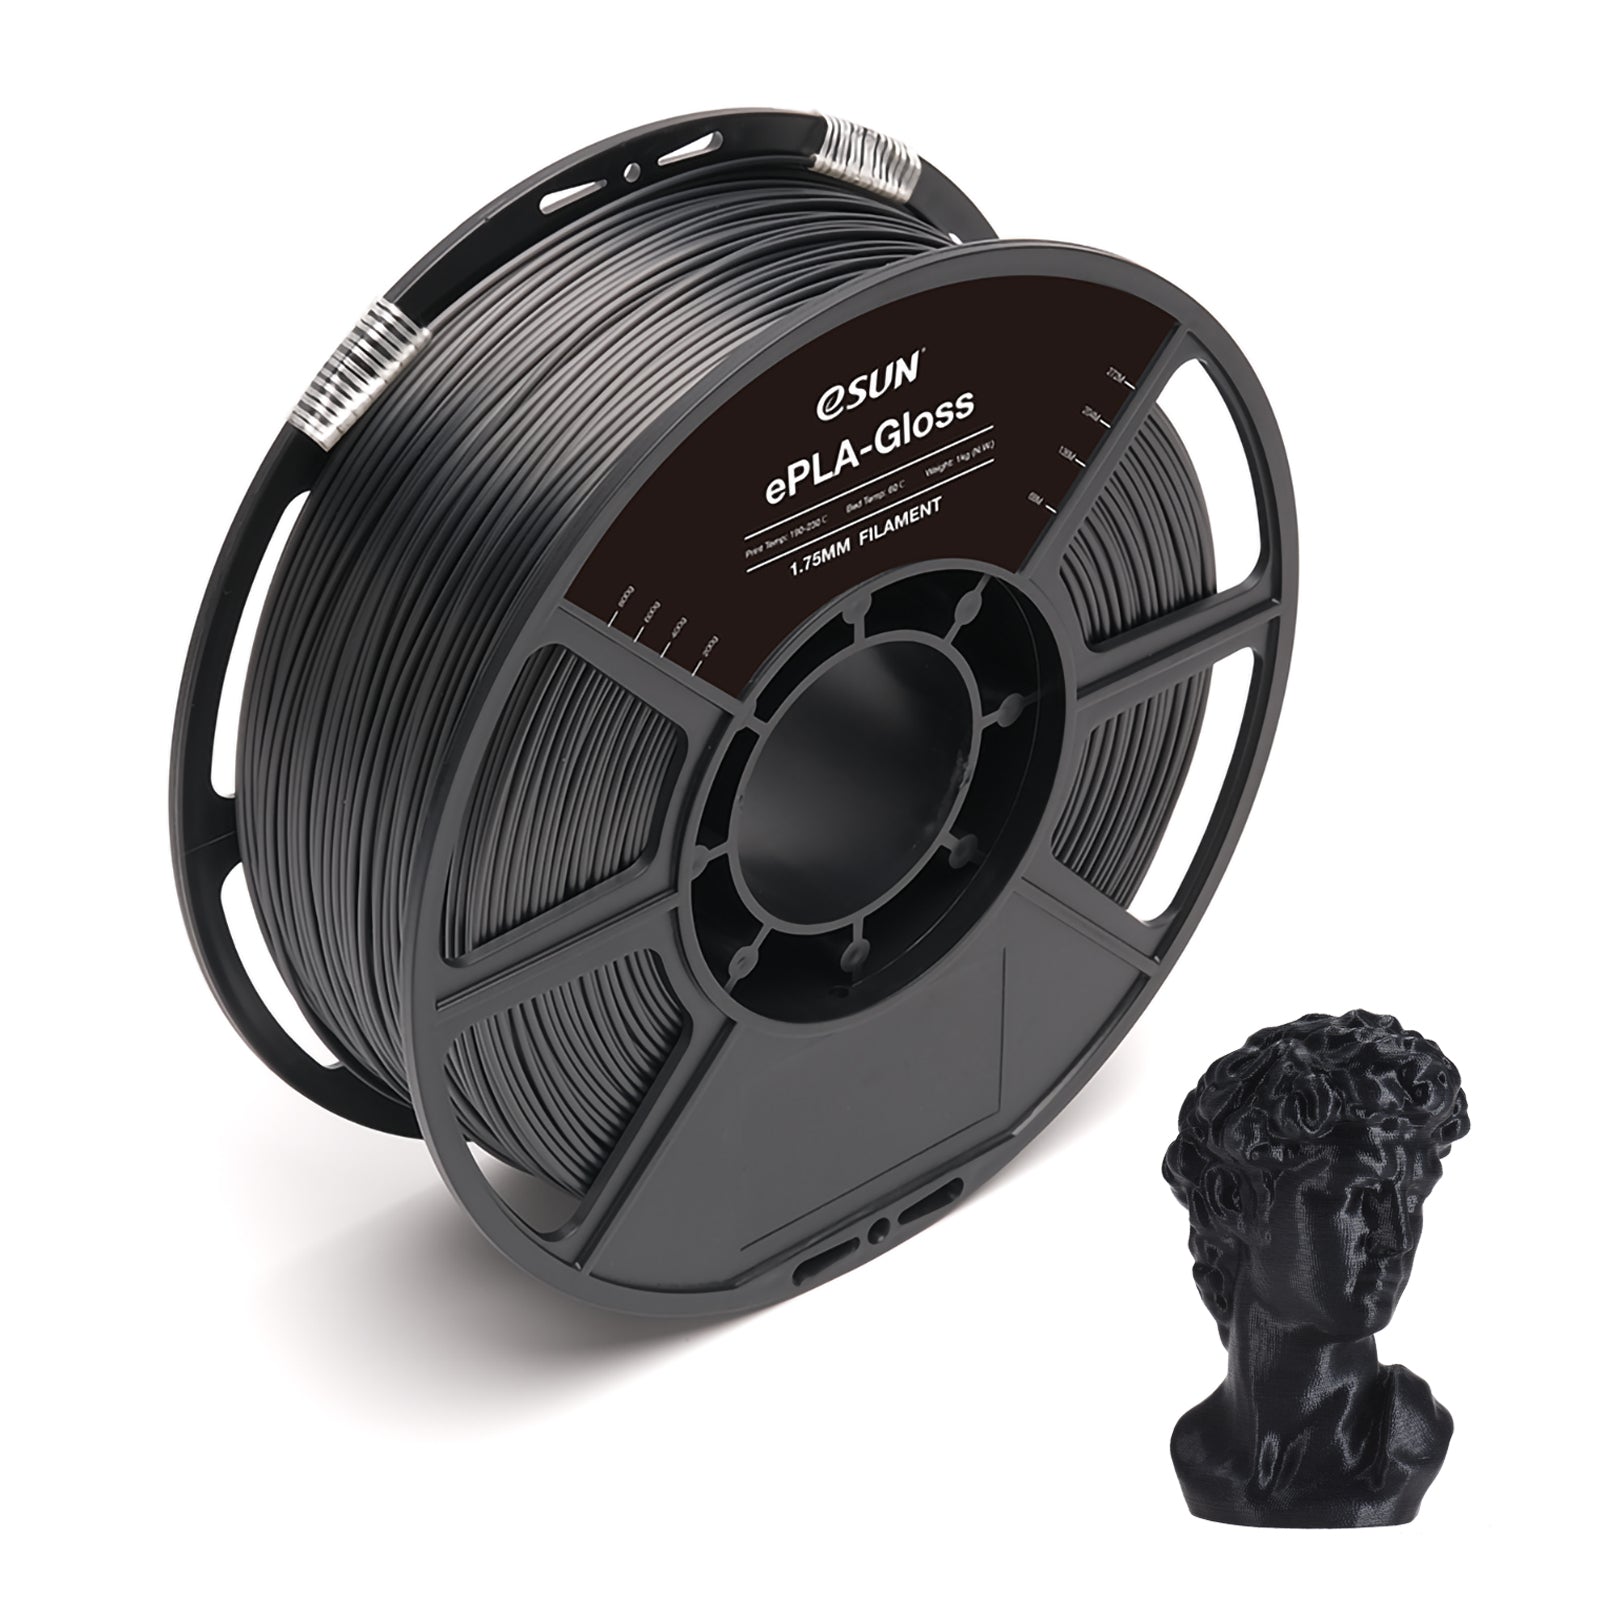 1kg Spool eSUN PLA Gloss Filament 1.75mm diameter Eco-Friendly printing consumables compatible with Creality Artillery Anycubic 3D Printers